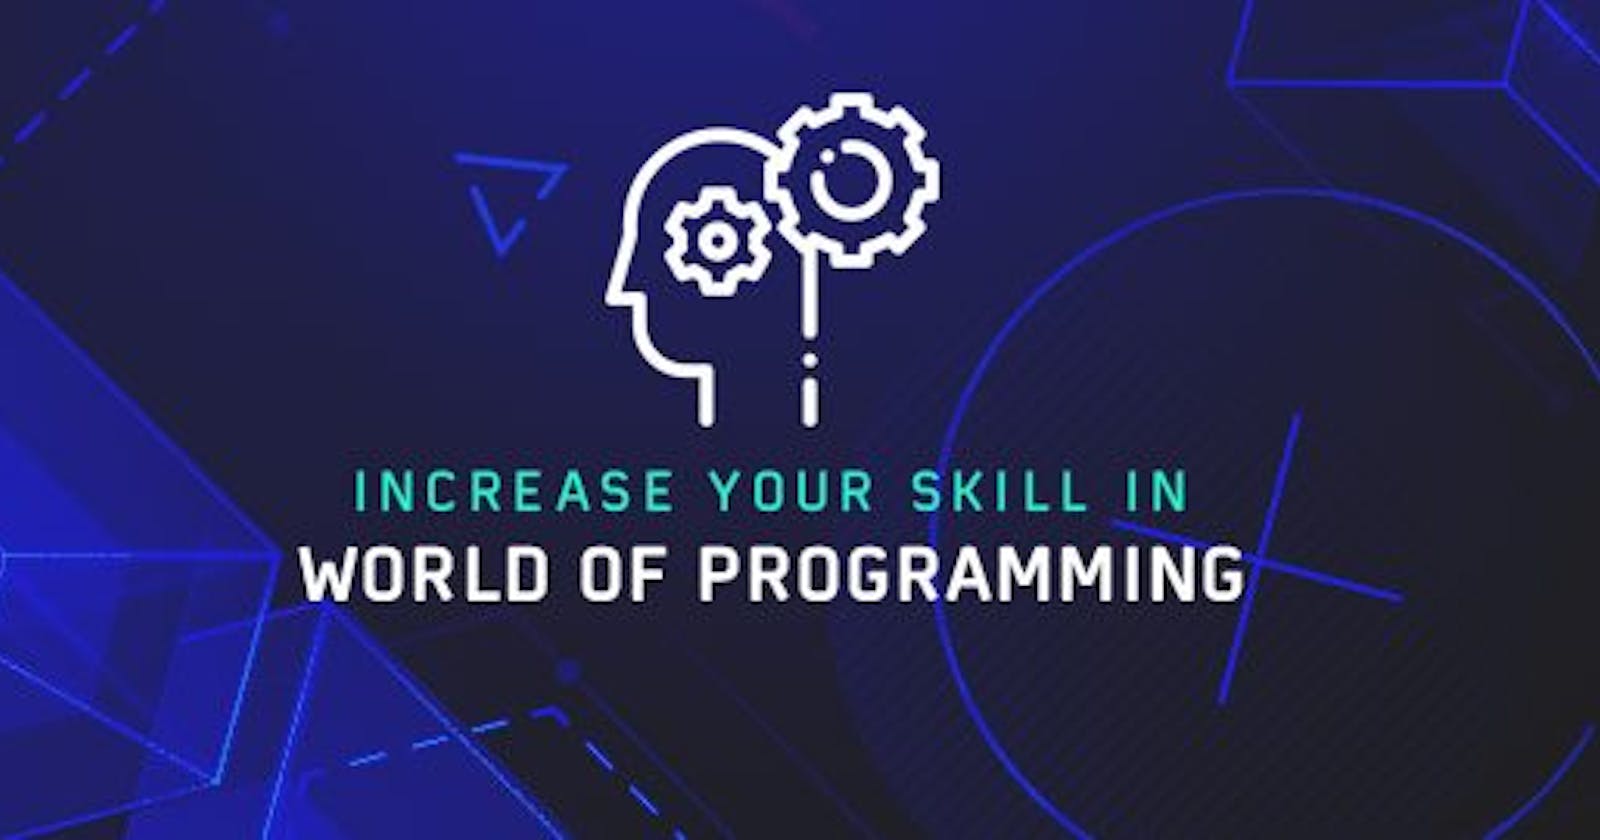 14 Best Blogs To Increase Your Skill In the World of Programming